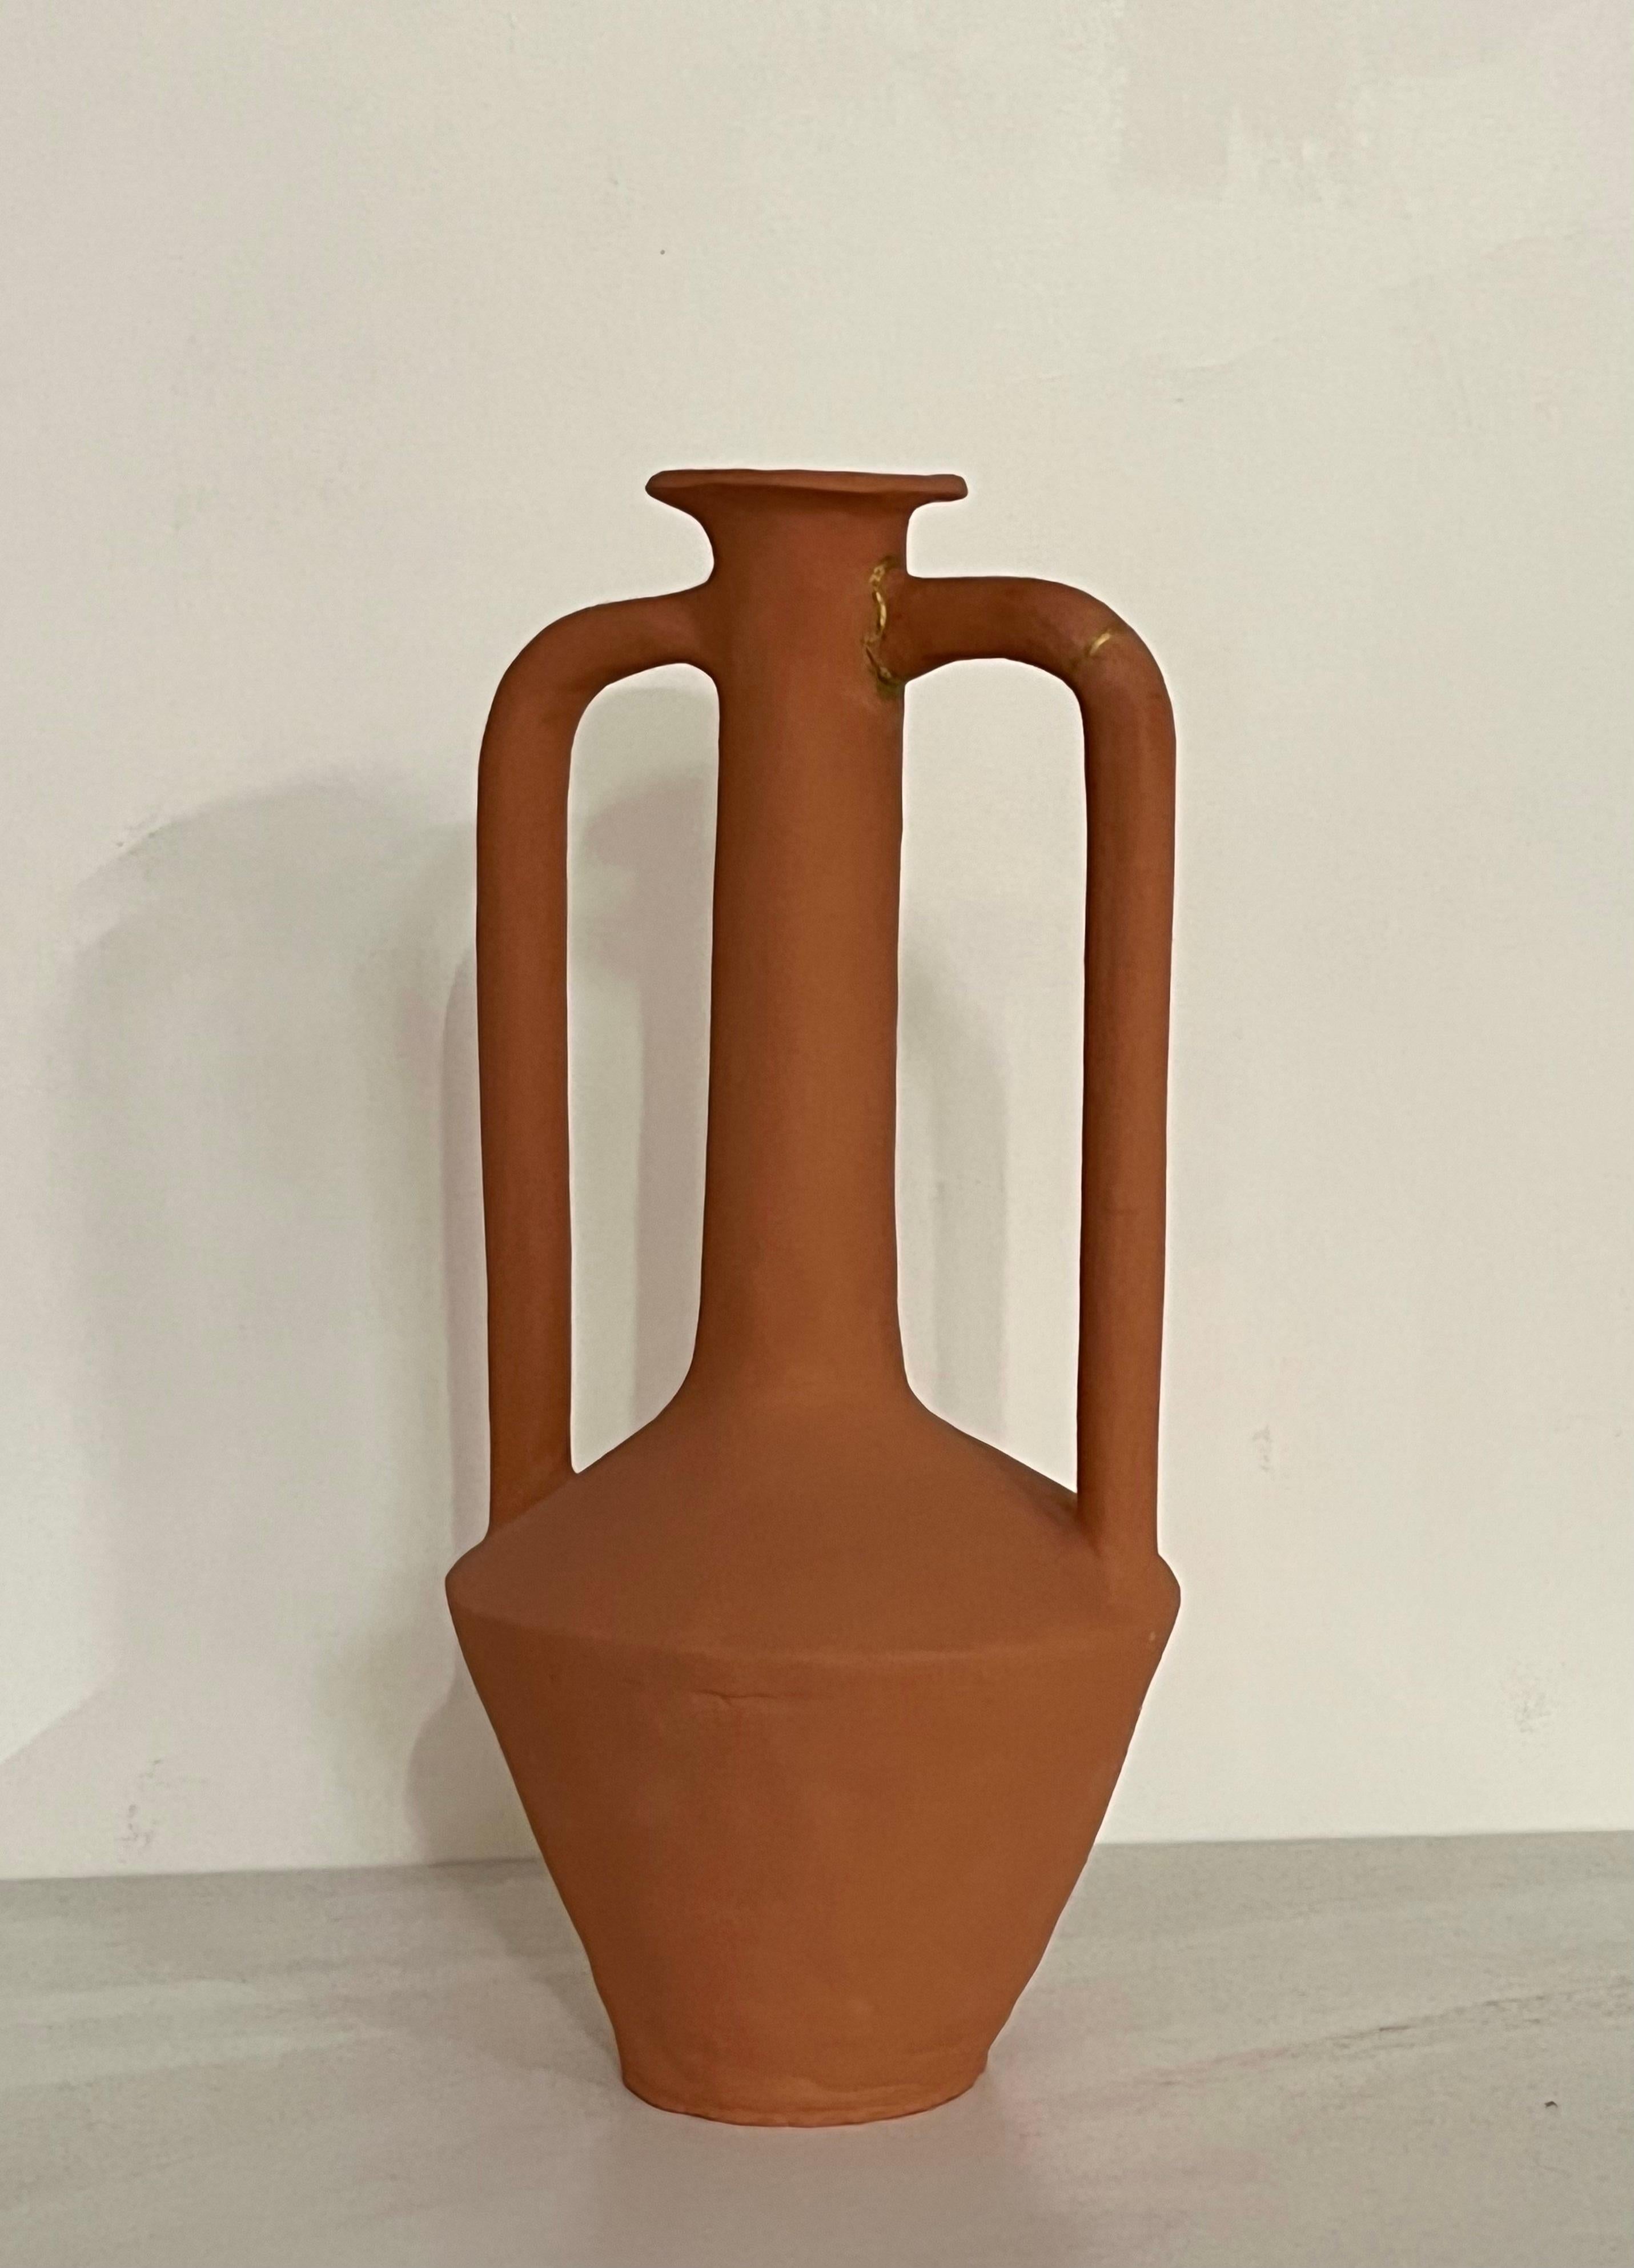 Terracotta Long Neck Vase by Solem Ceramics
Dimensions: Ø 15 x H 38 cm.
Materials: Red Stoneware, terracotta slip.

Solem’s work pulls from memories of the architecture and community within SWANA and Southeast Asia thorough exploring familiar